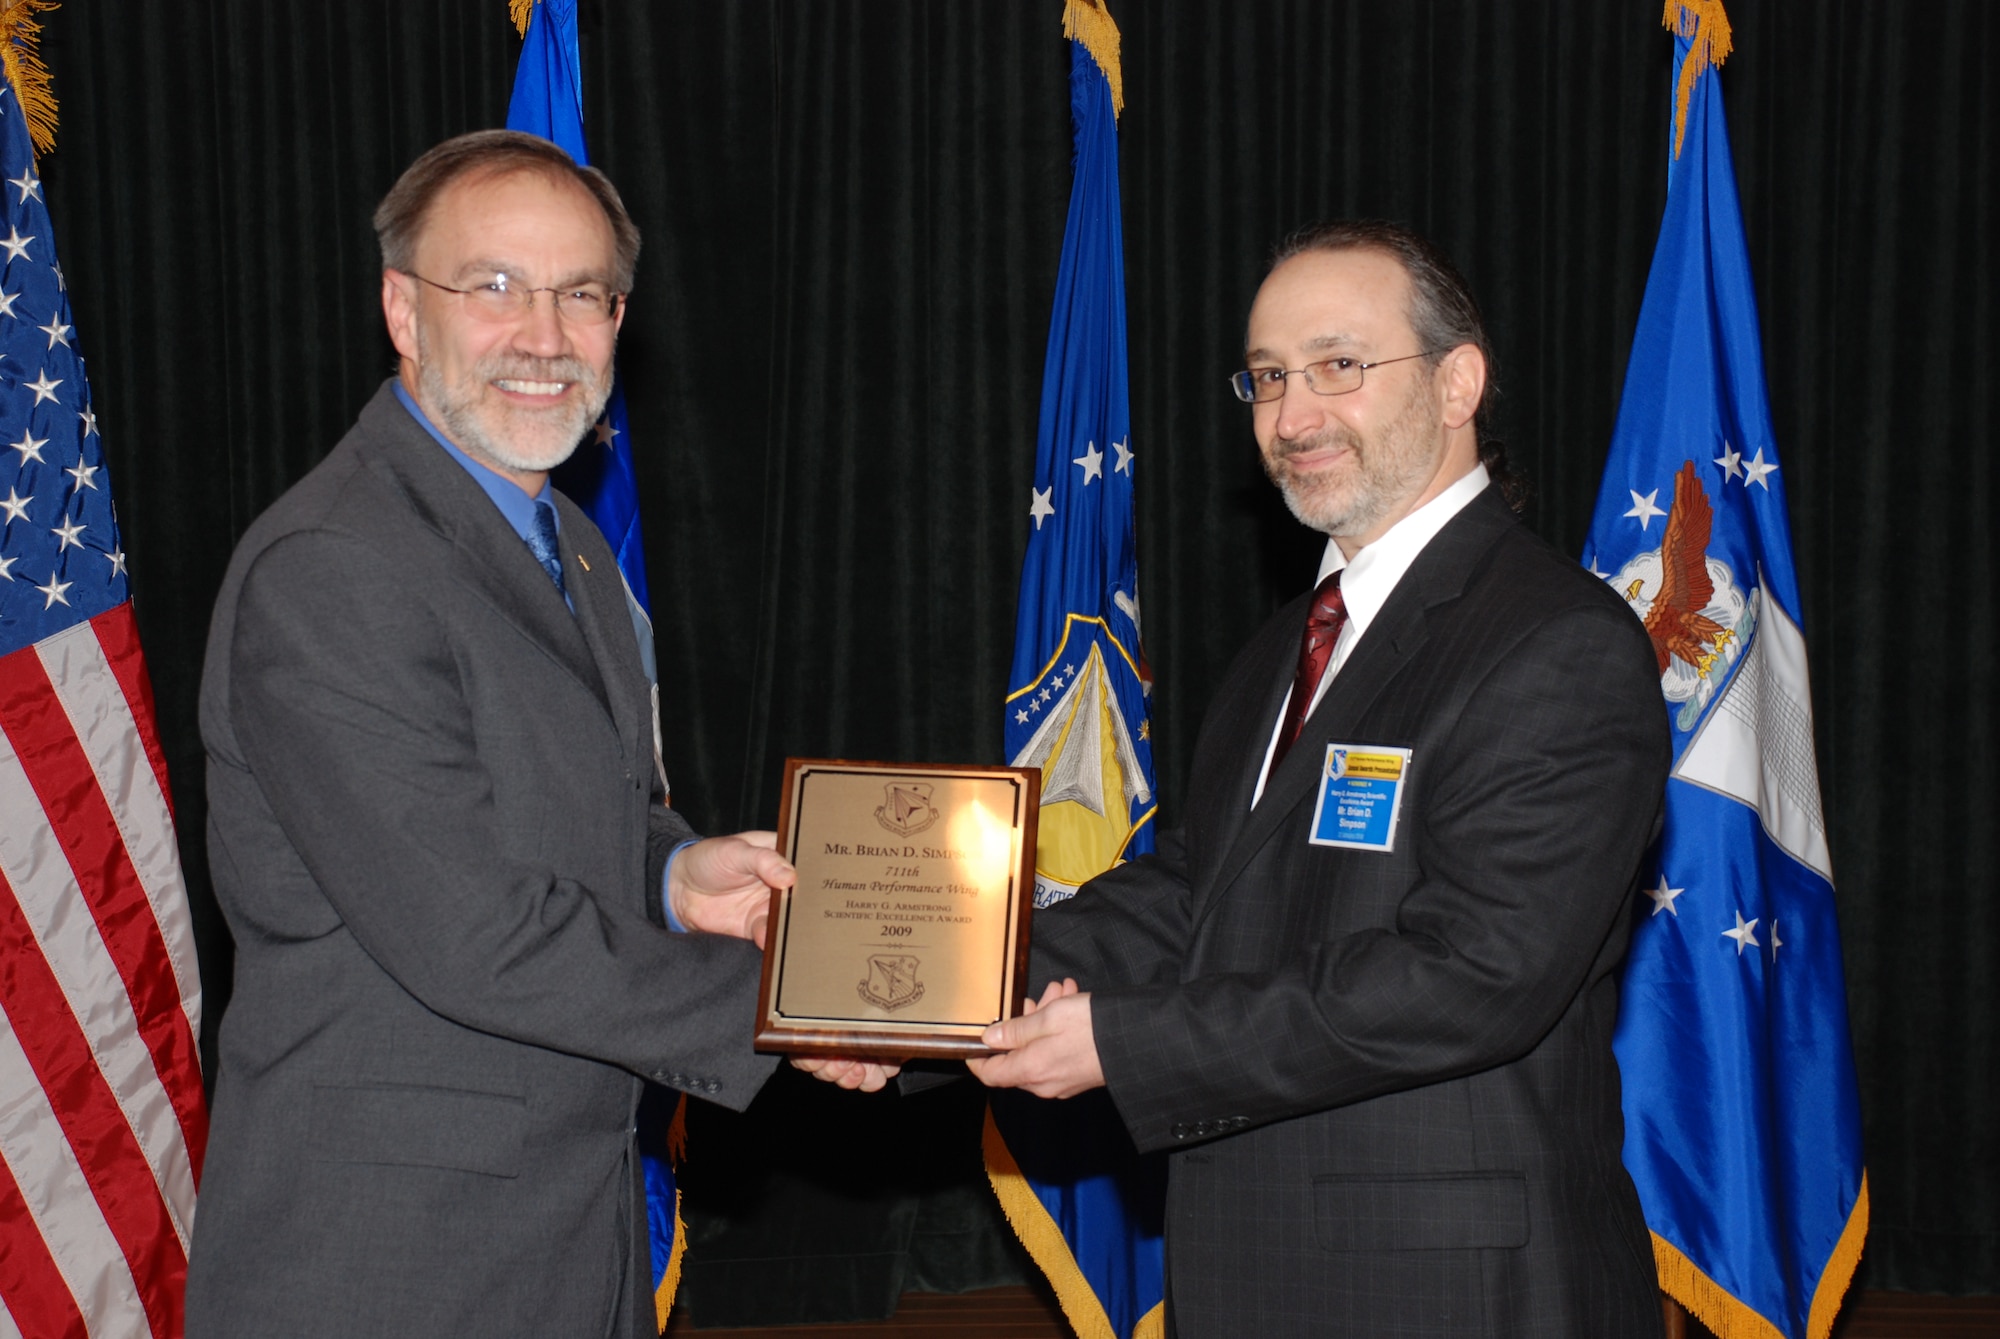 Mr. Thomas Wells (left), director of the Air Force Research Laboratory’s 711th Human Performance Wing (711 HPW), presents the Harry G. Armstrong Award to 2009 winner Mr. Brian Simpson, engineering research psychologist with the Human Effectiveness Directorate’s Warfighter Interface Division, Battlespace Acoustics Branch,  January 22 at the HPW’s annual awards luncheon. (Photo by Chris Gulliford, 711 HPW)